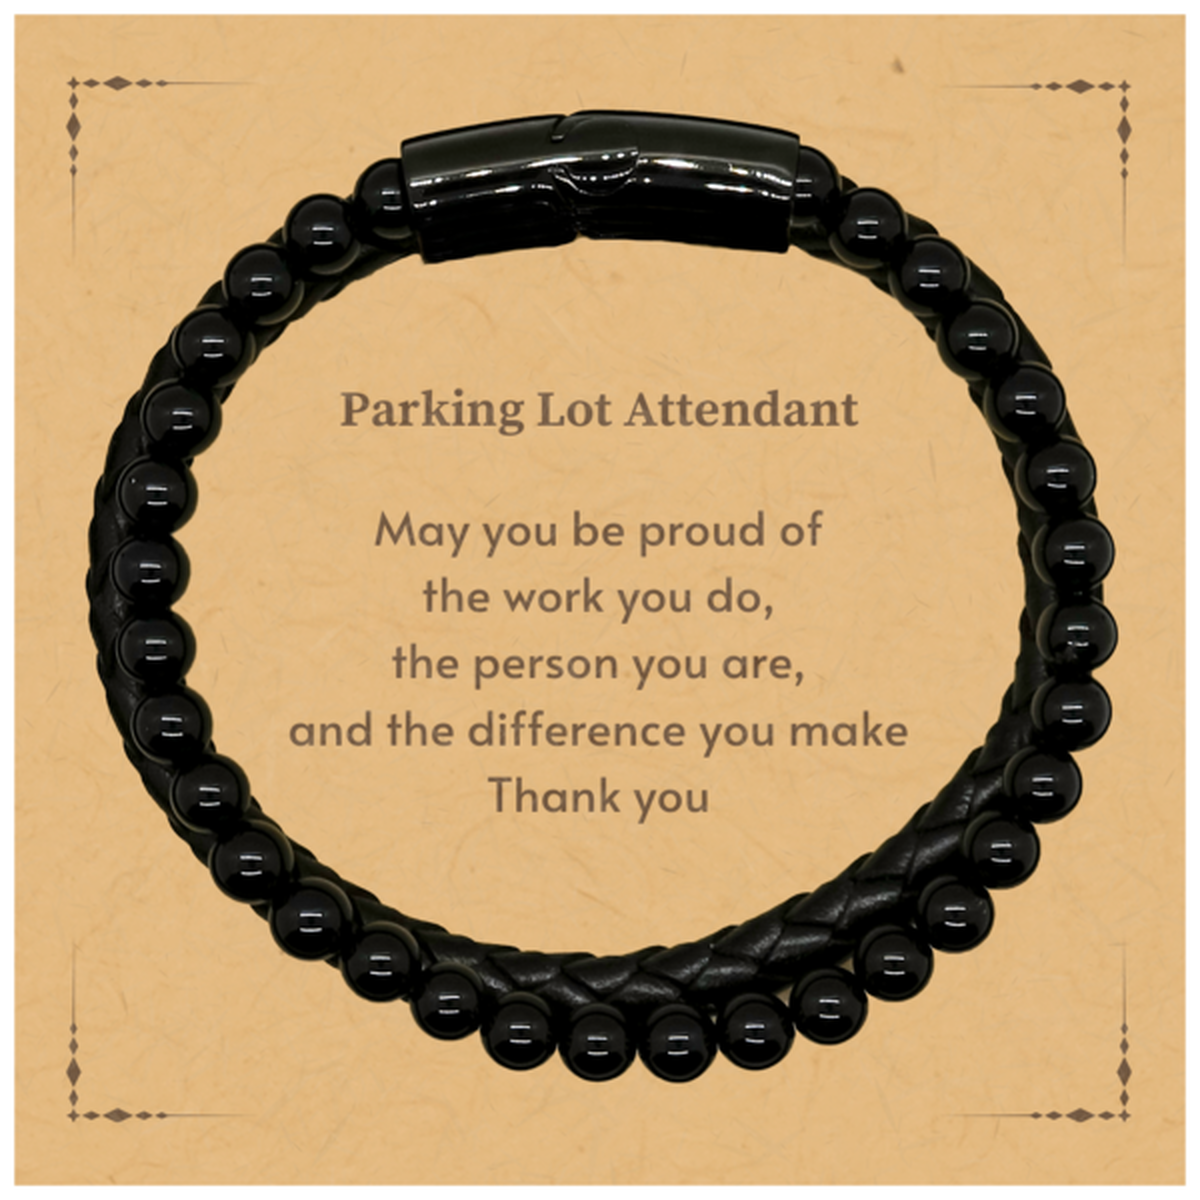 Heartwarming Stone Leather Bracelets Retirement Coworkers Gifts for Parking Lot Attendant, Parking Lot Attendant May You be proud of the work you do, the person you are Gifts for Boss Men Women Friends